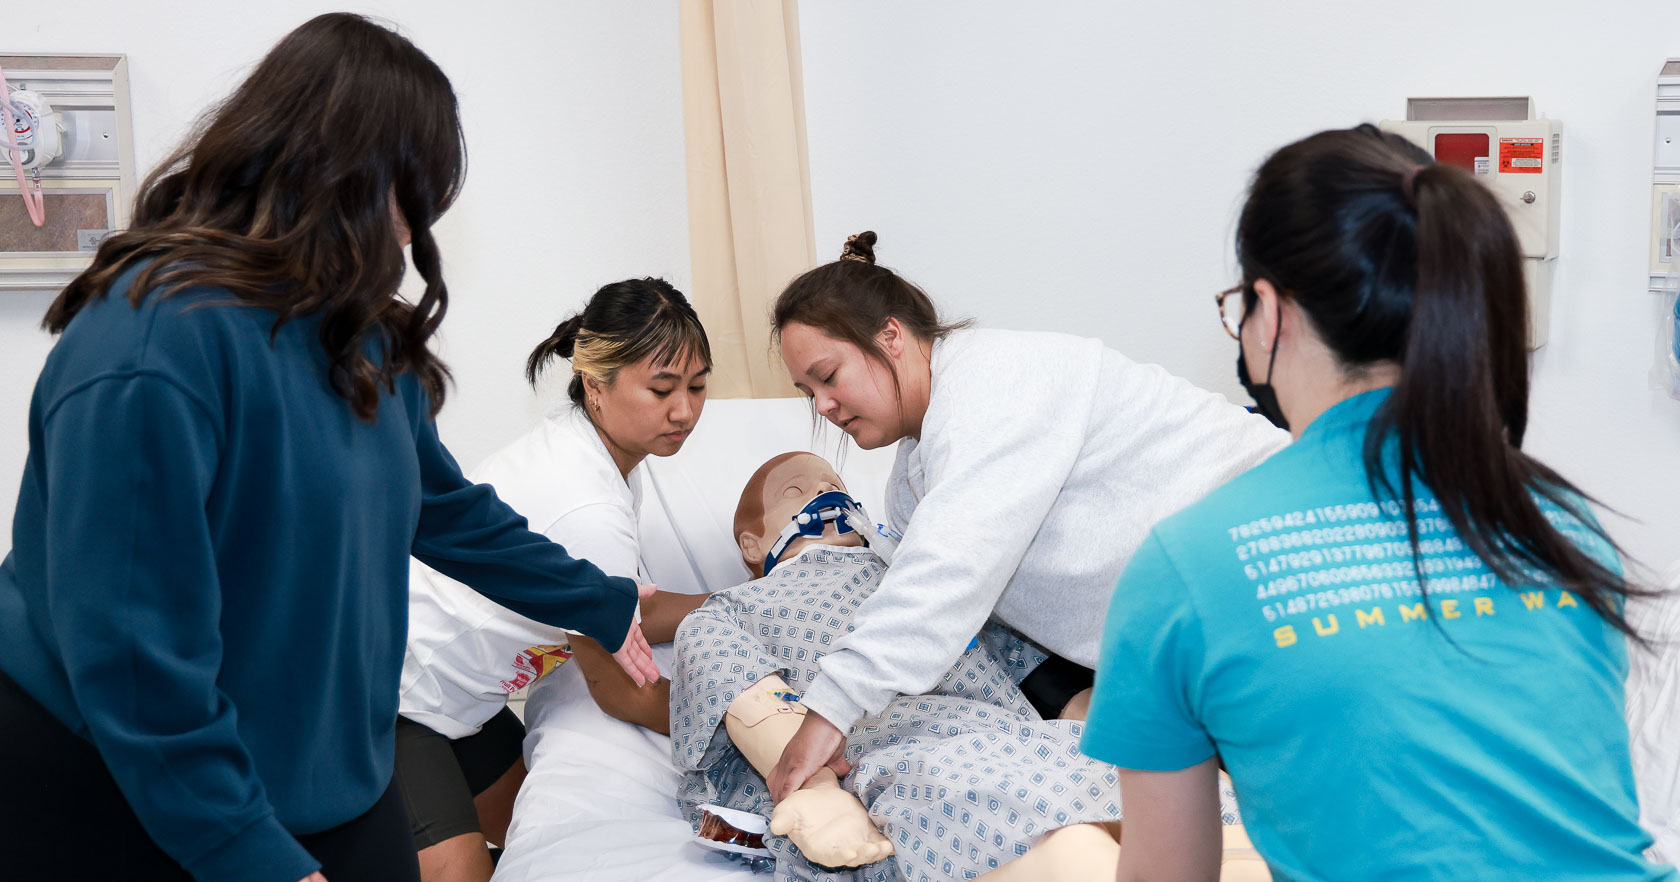 Four students move a simulation mannequin in a gown from a hospital bed. One student guides the others, while two student lift the upper body, and one student holds the feet.